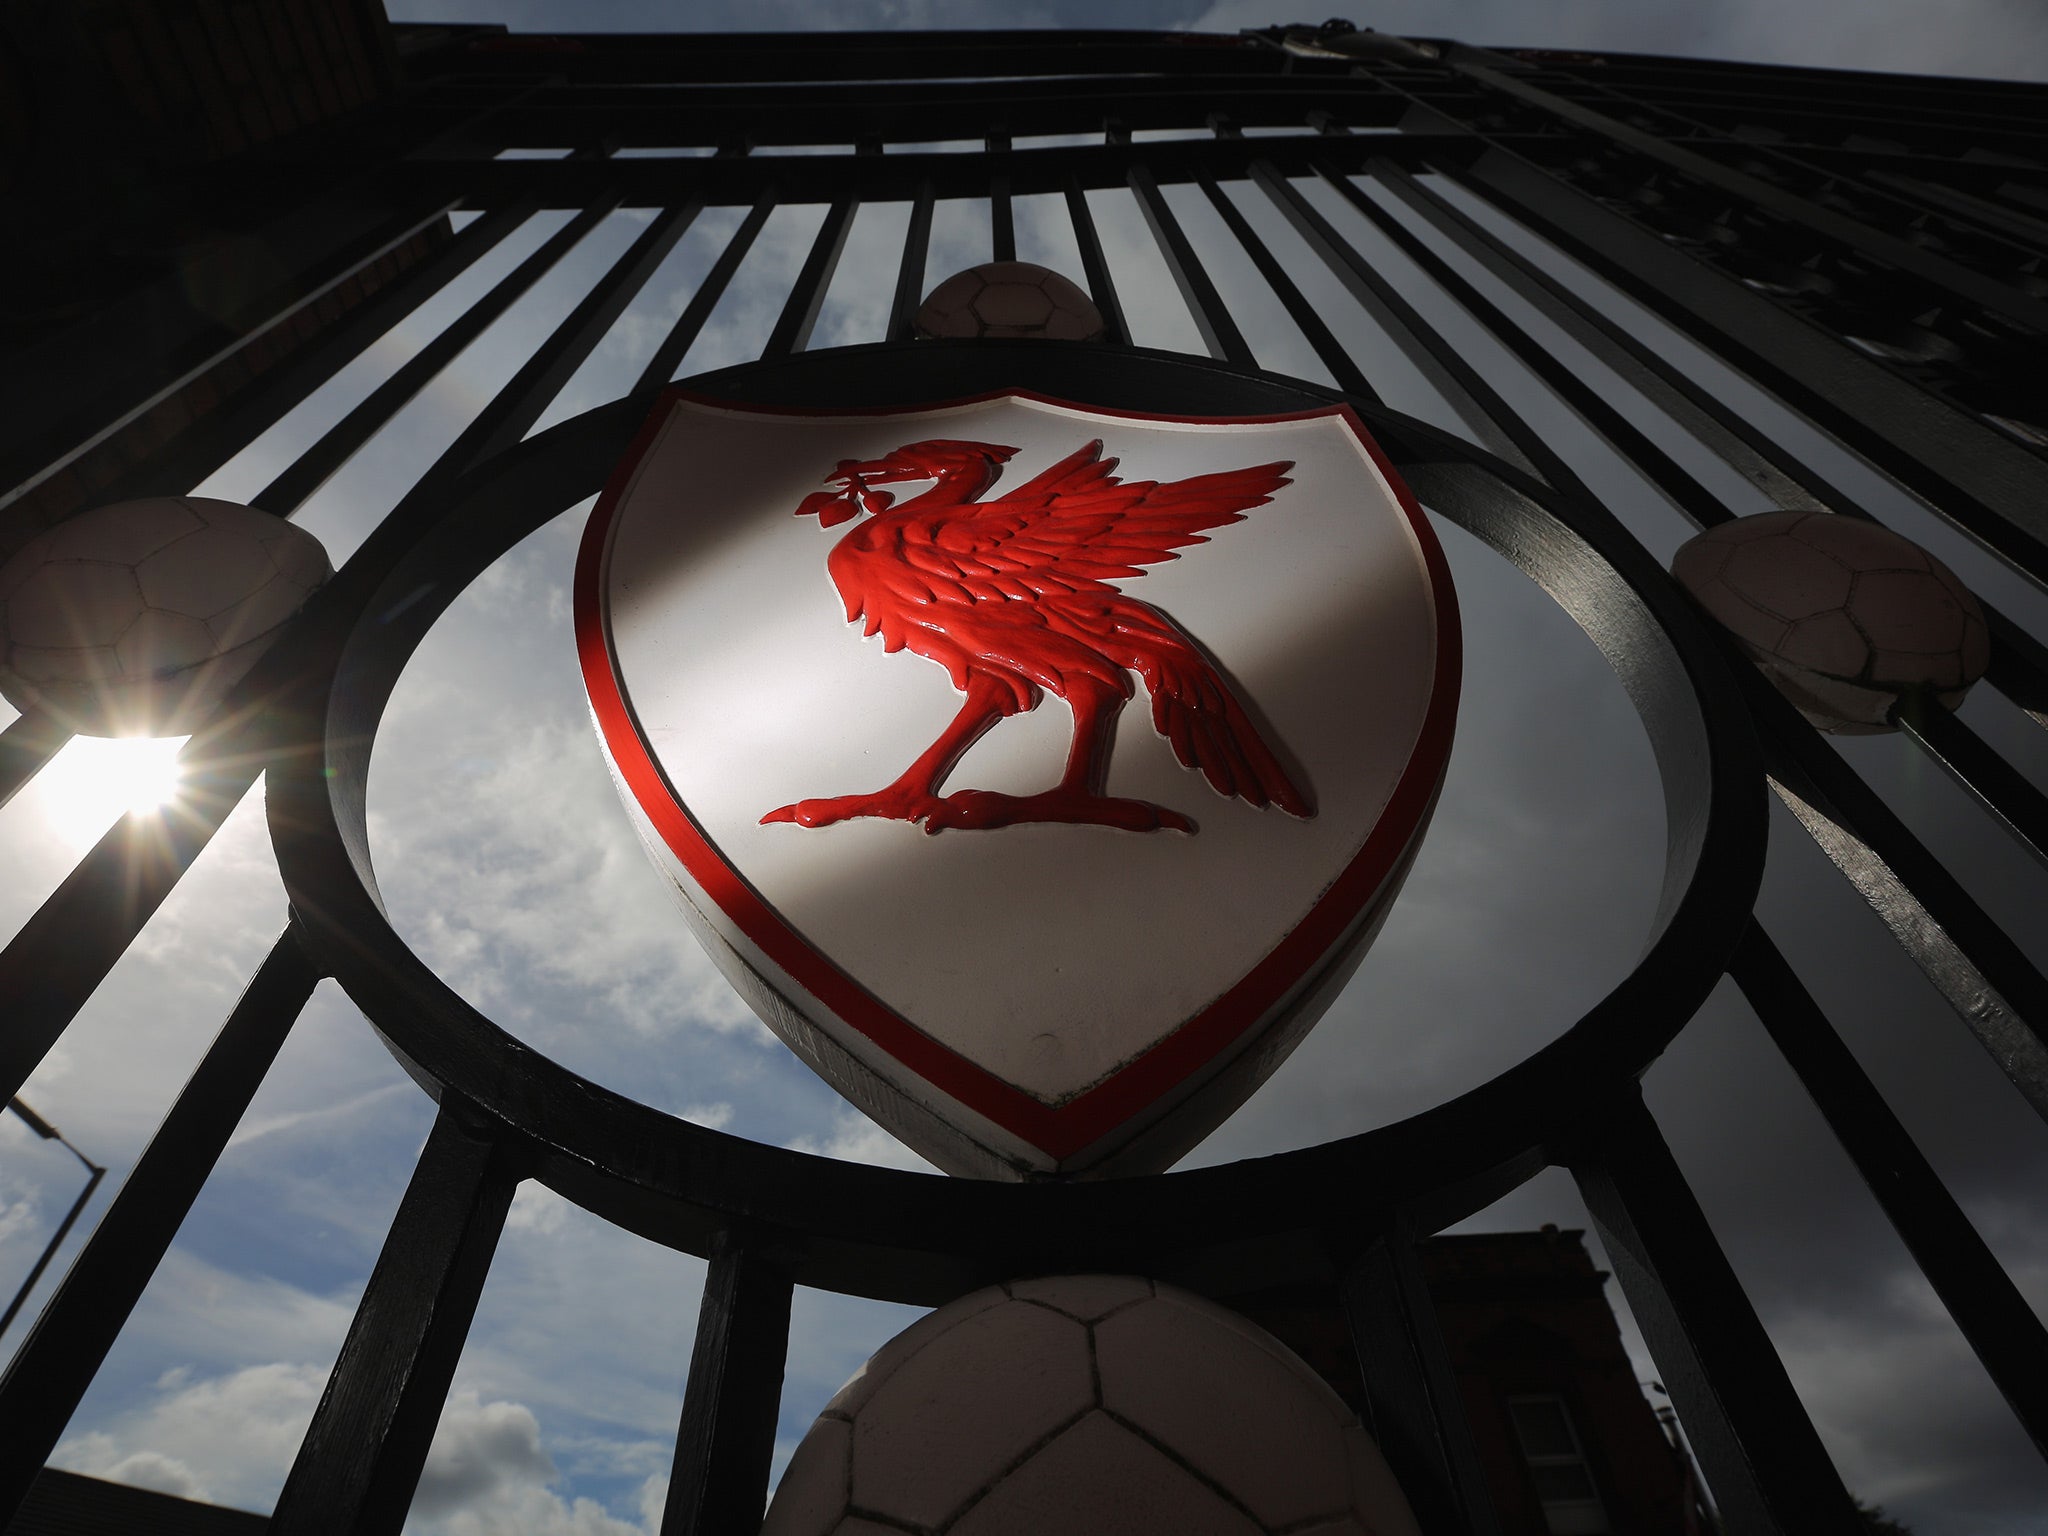 Liverpool will not comment on the case until the process is complete